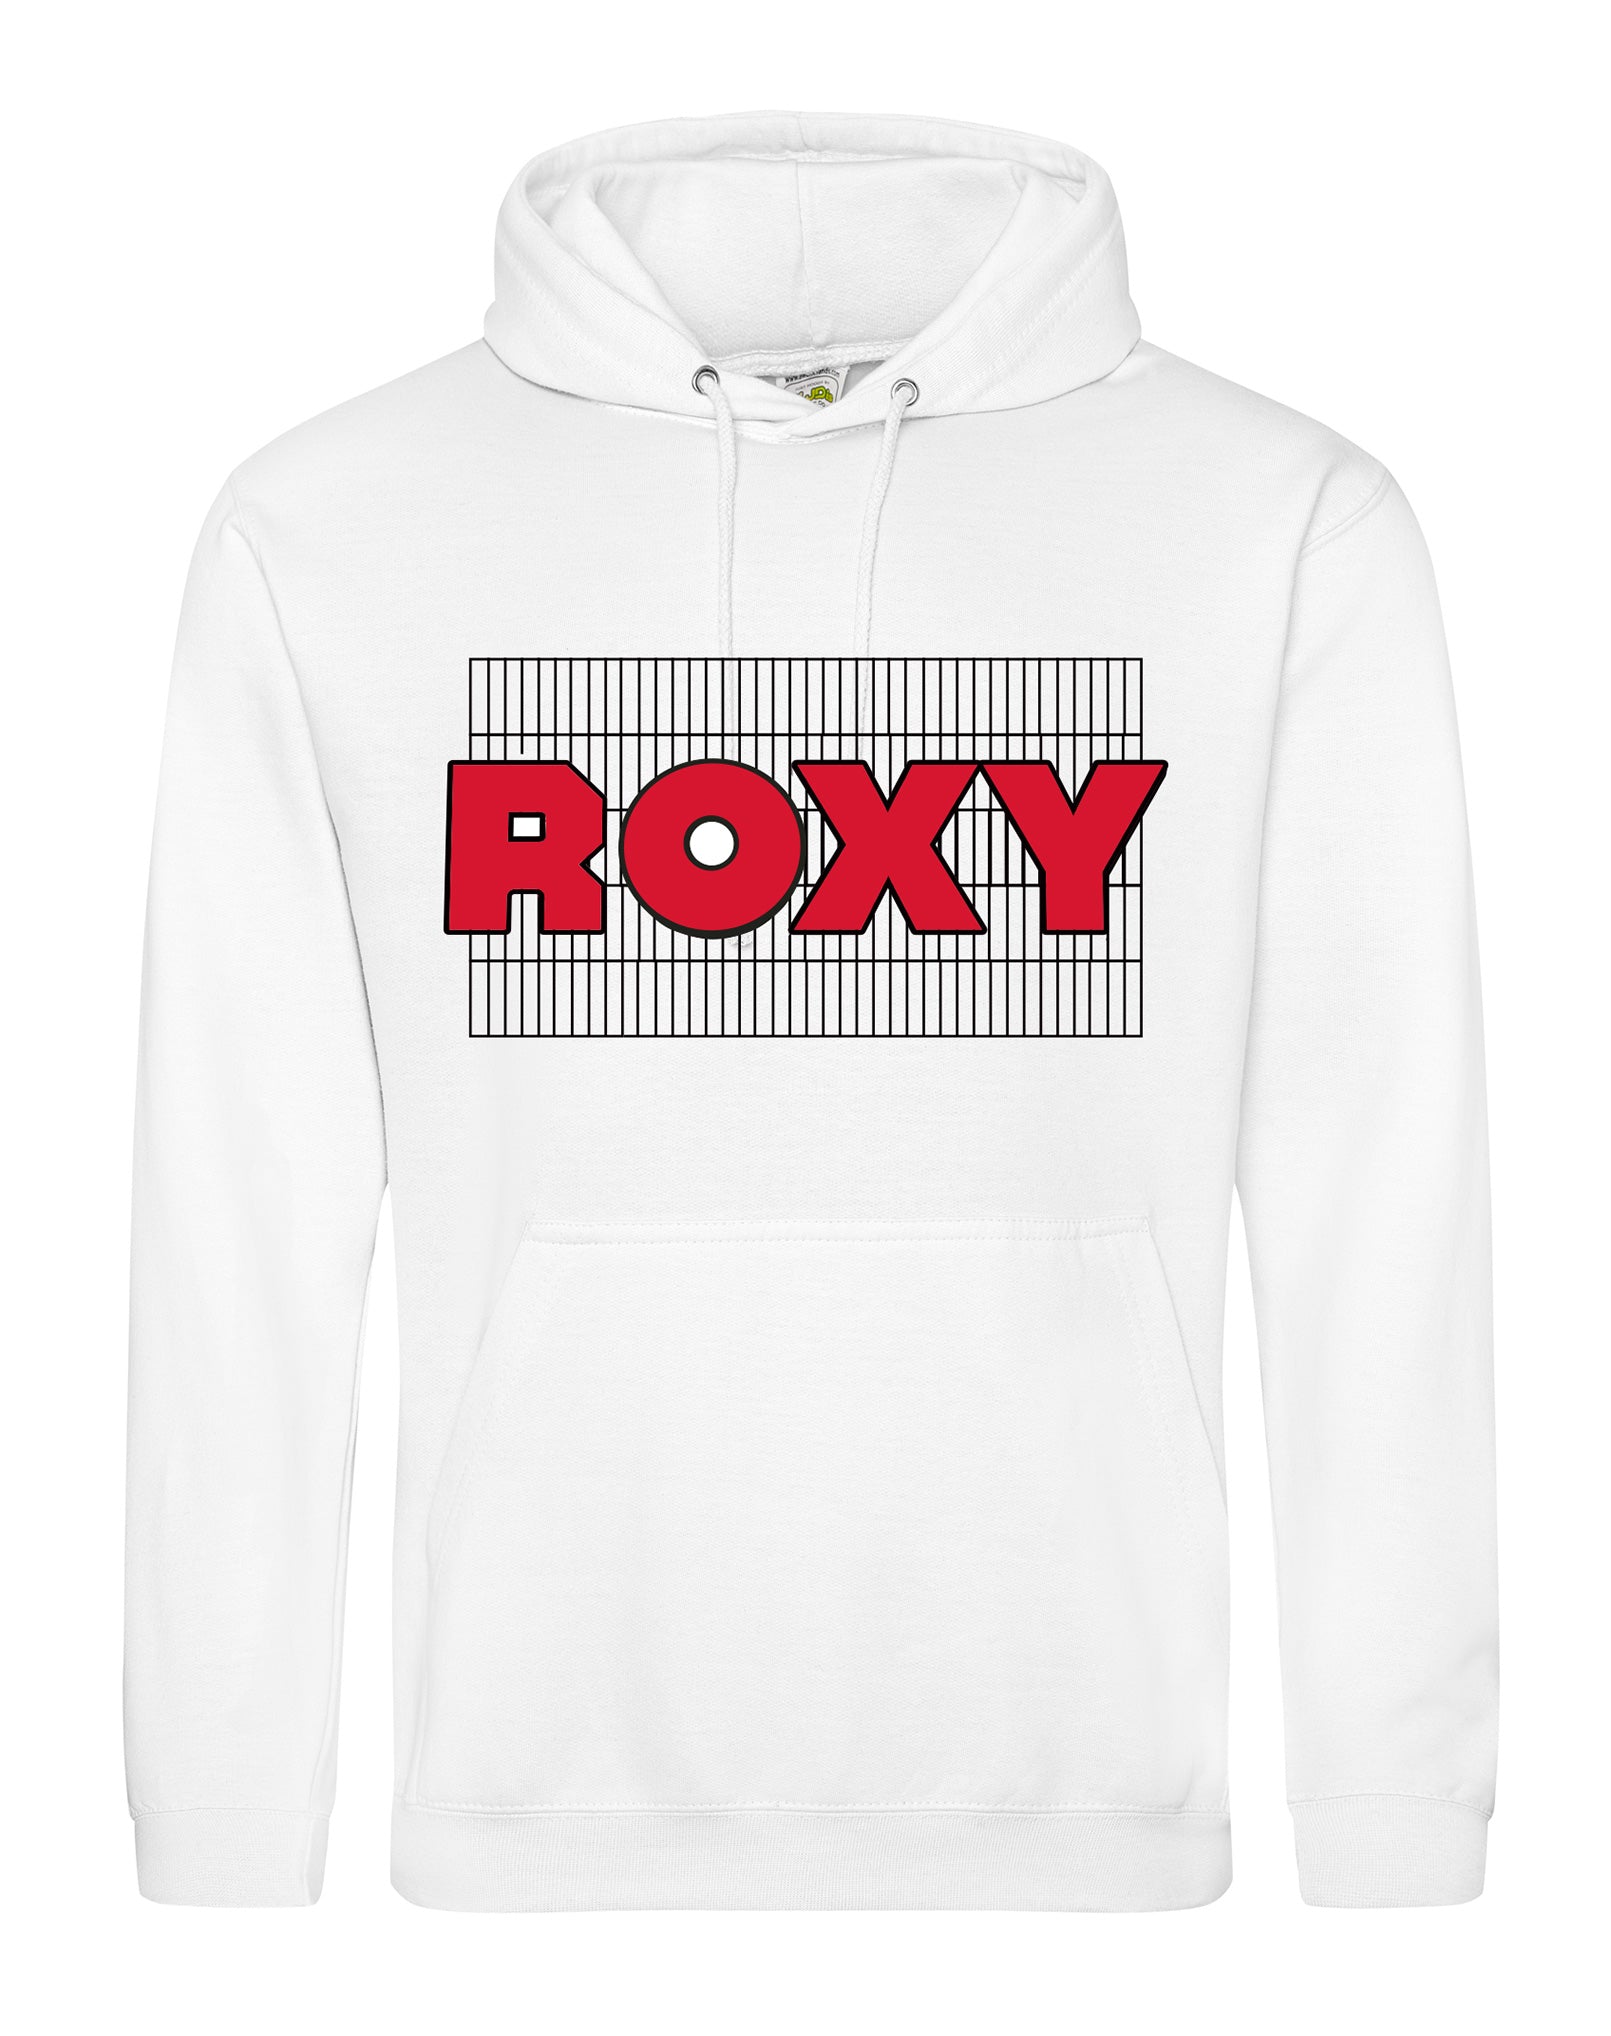 Roxy unisex fit hoodie - various colours - Dirty Stop Outs